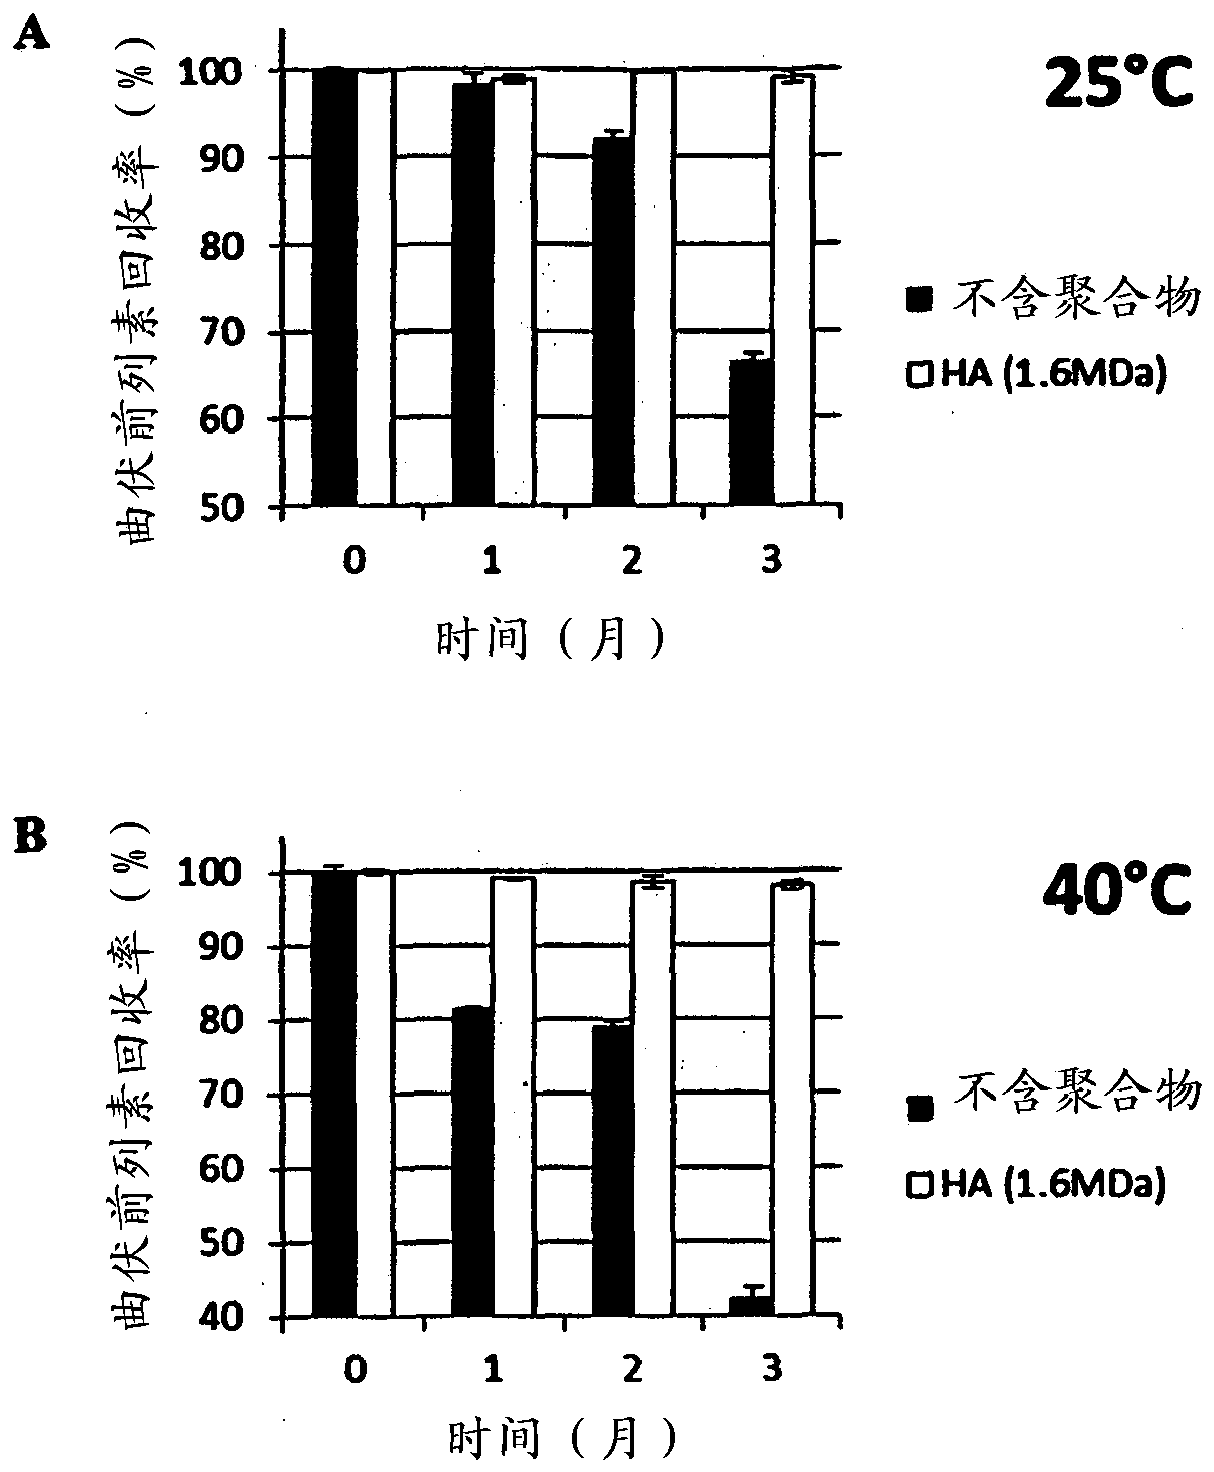 Ophthalmic compositions comprising prostaglandin f2α derivatives and hyaluronic acid